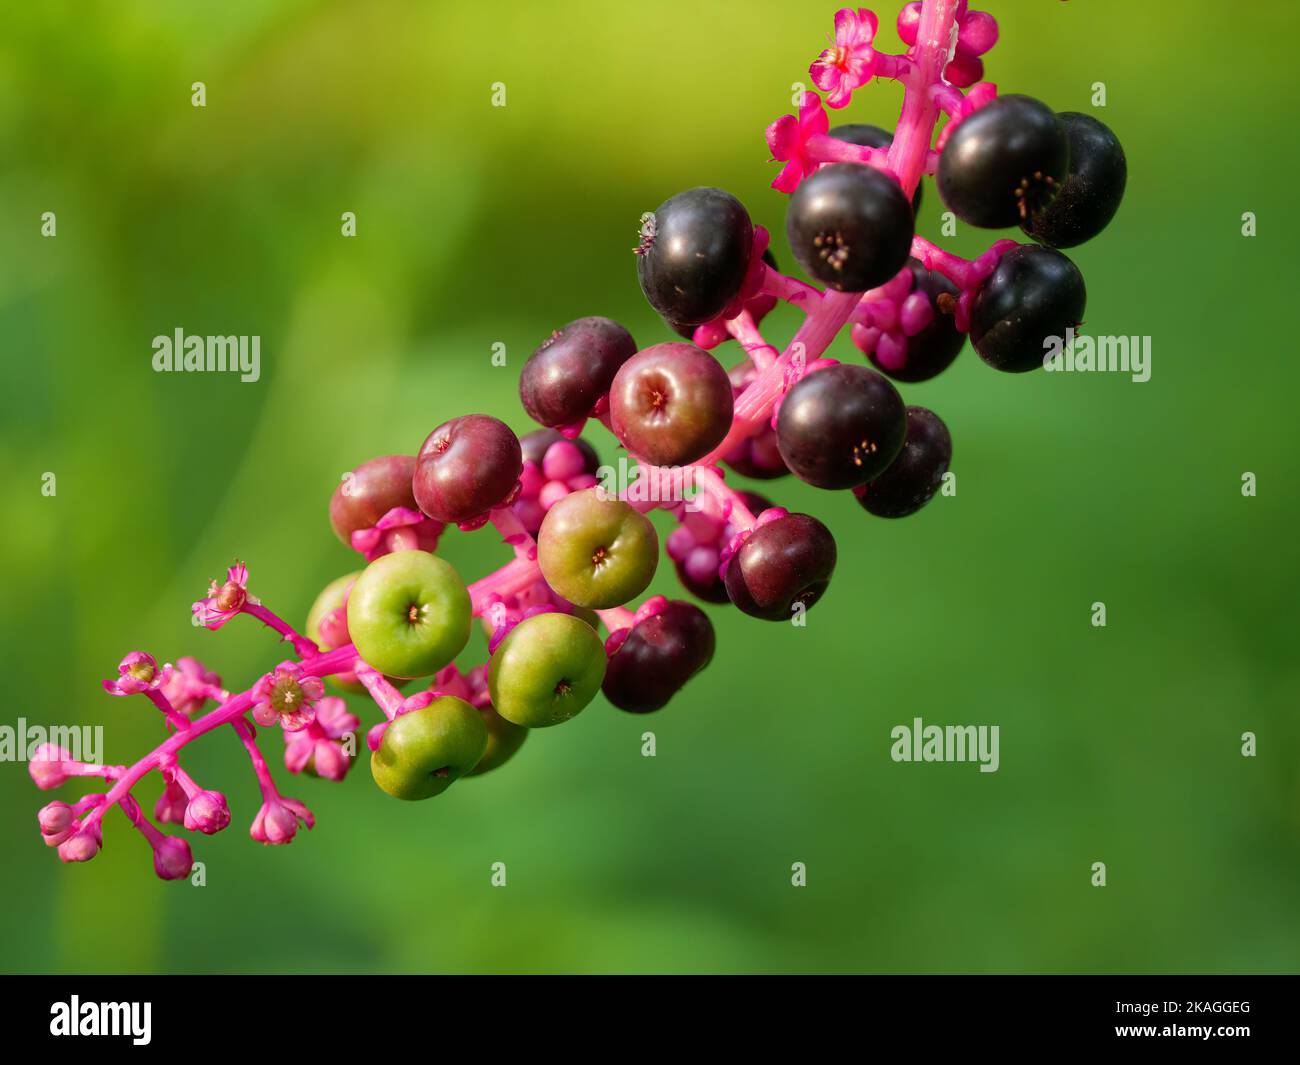 American pokeweed berries. One of the most toxic plants in North America, though birds are unaffected and eat the berries. Stock Photo